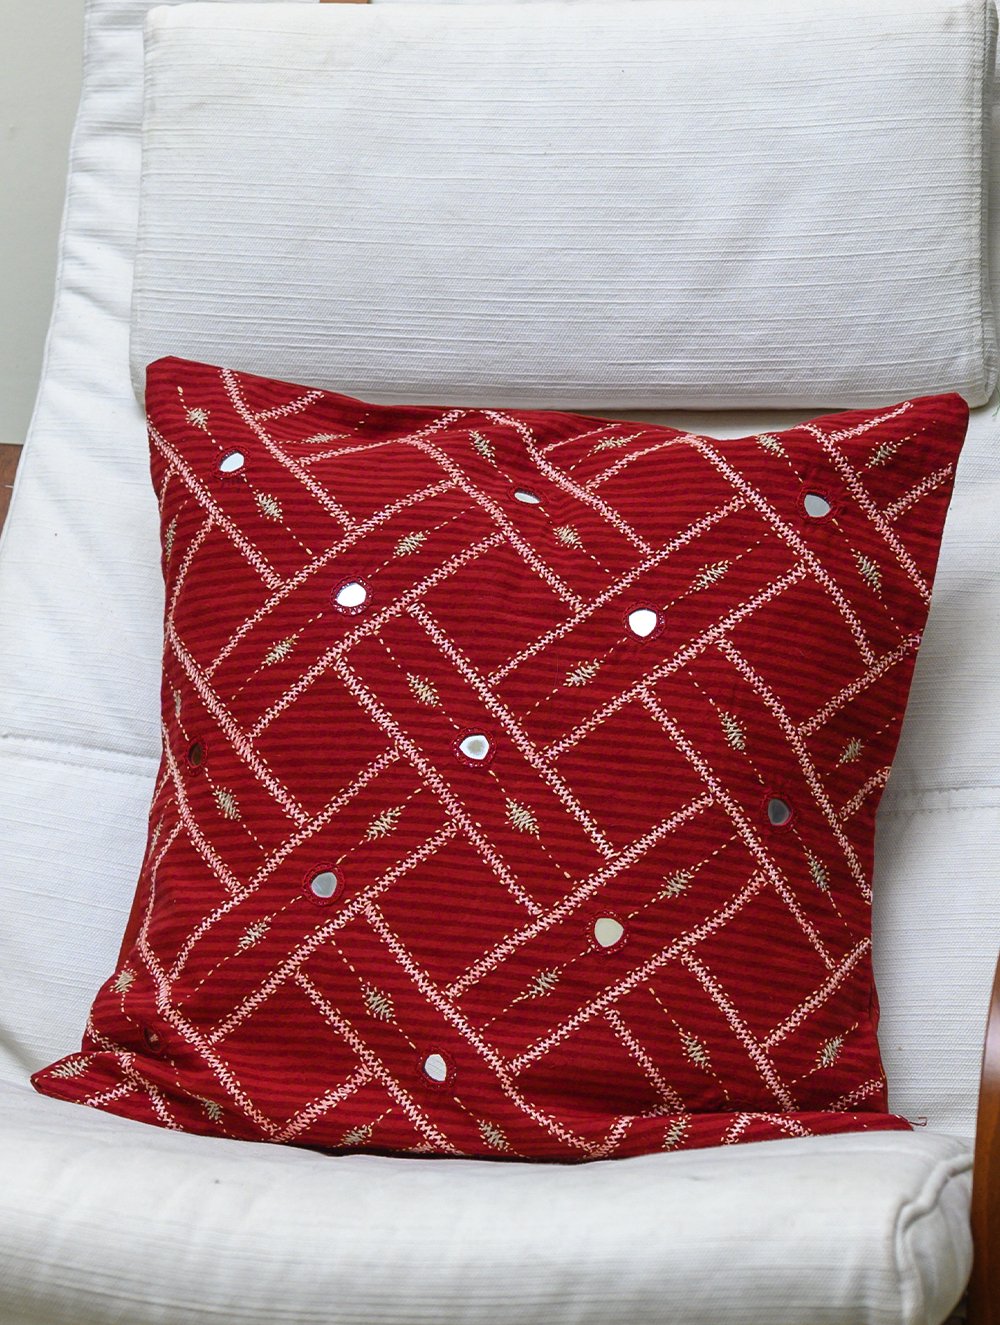 Load image into Gallery viewer, Lambani Tribal Hand Embroidered Cushion Covers - Flow  (Set of 2)